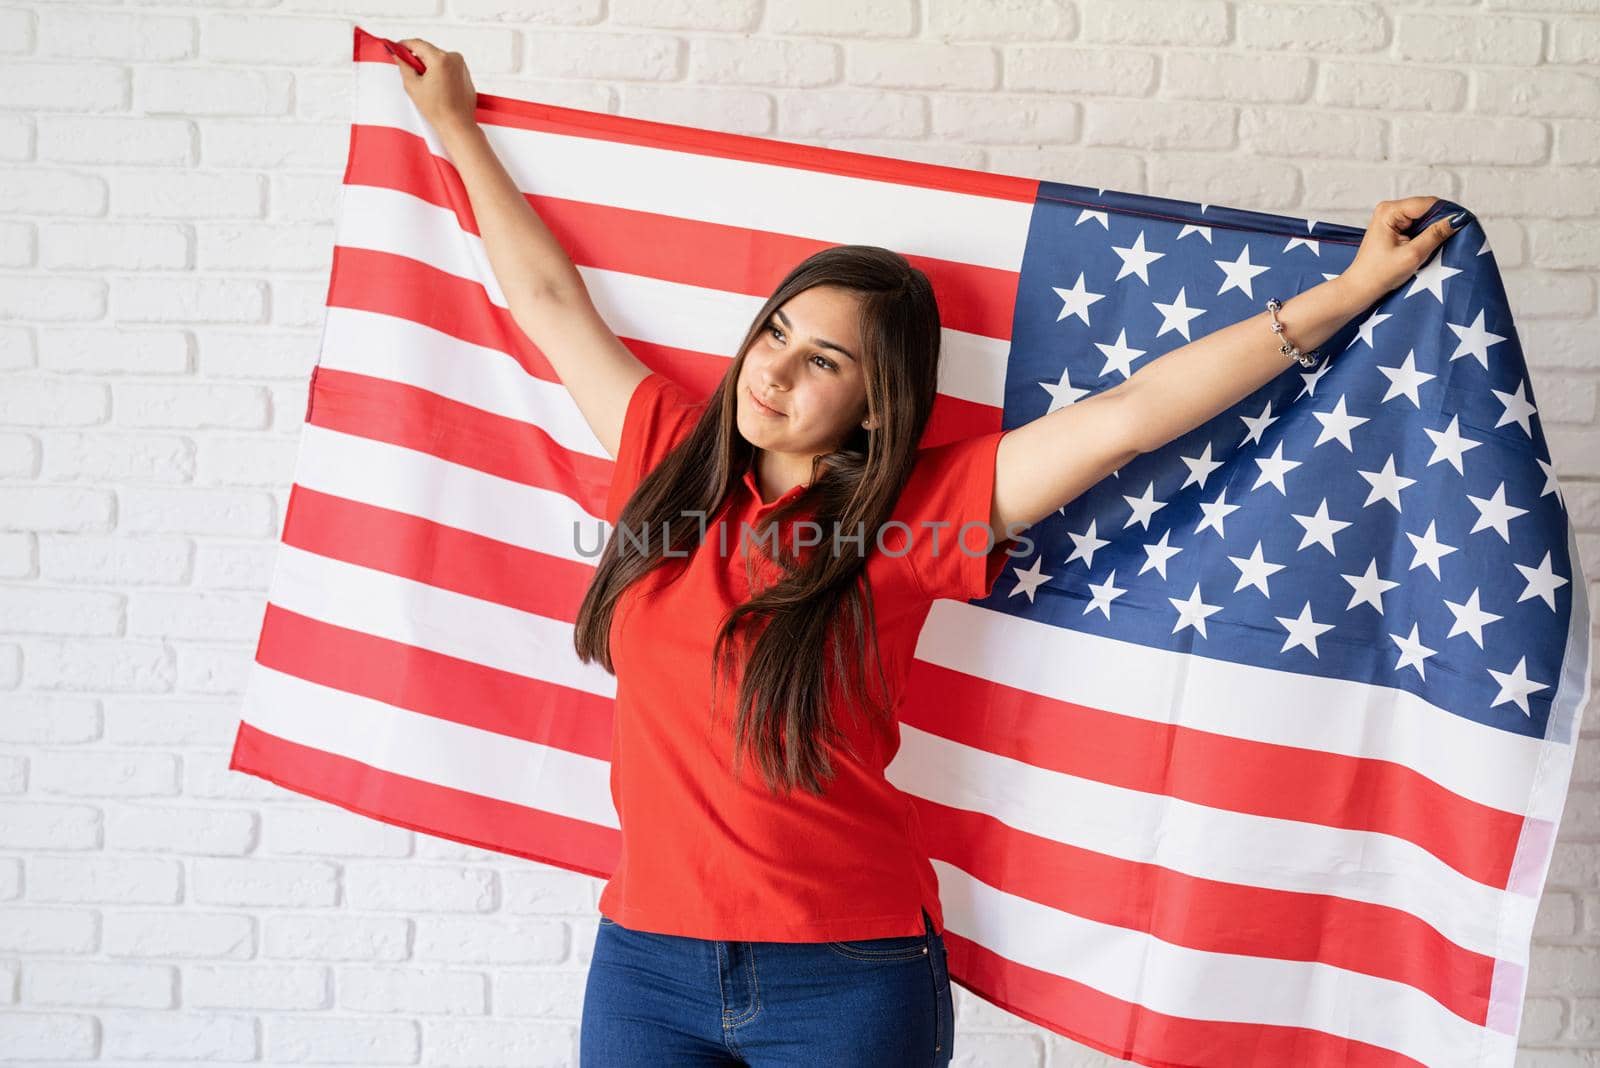 Independence day of the USA. Happy July 4th. Young smiling woman with national flag of the USA.